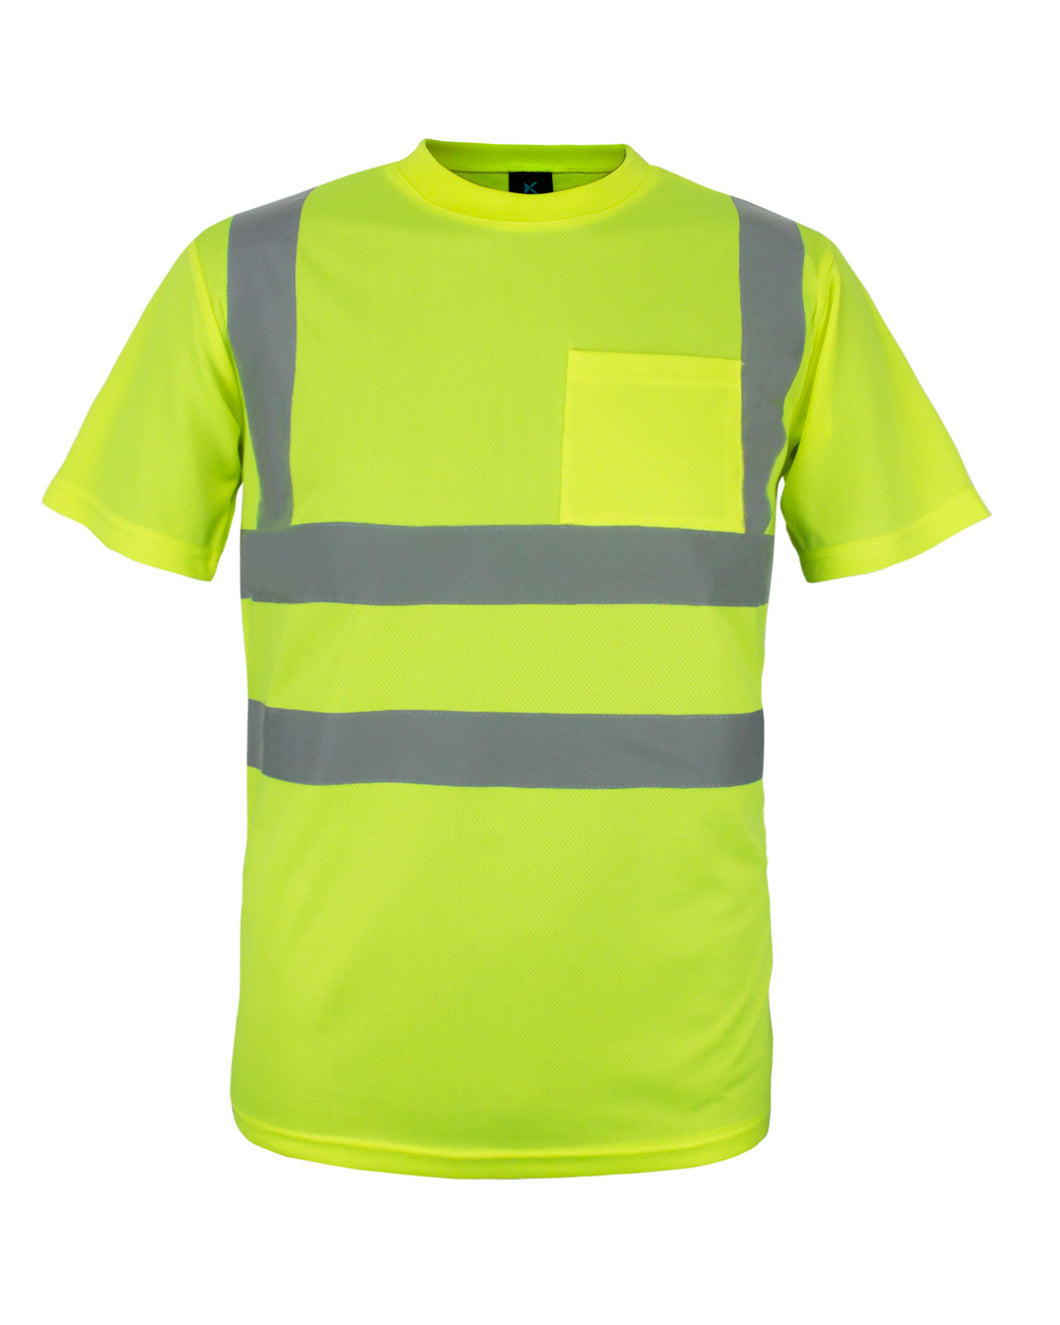 Kolossus 100% Polyester ANSI Class 2 Compliant High Visibility Short S ...